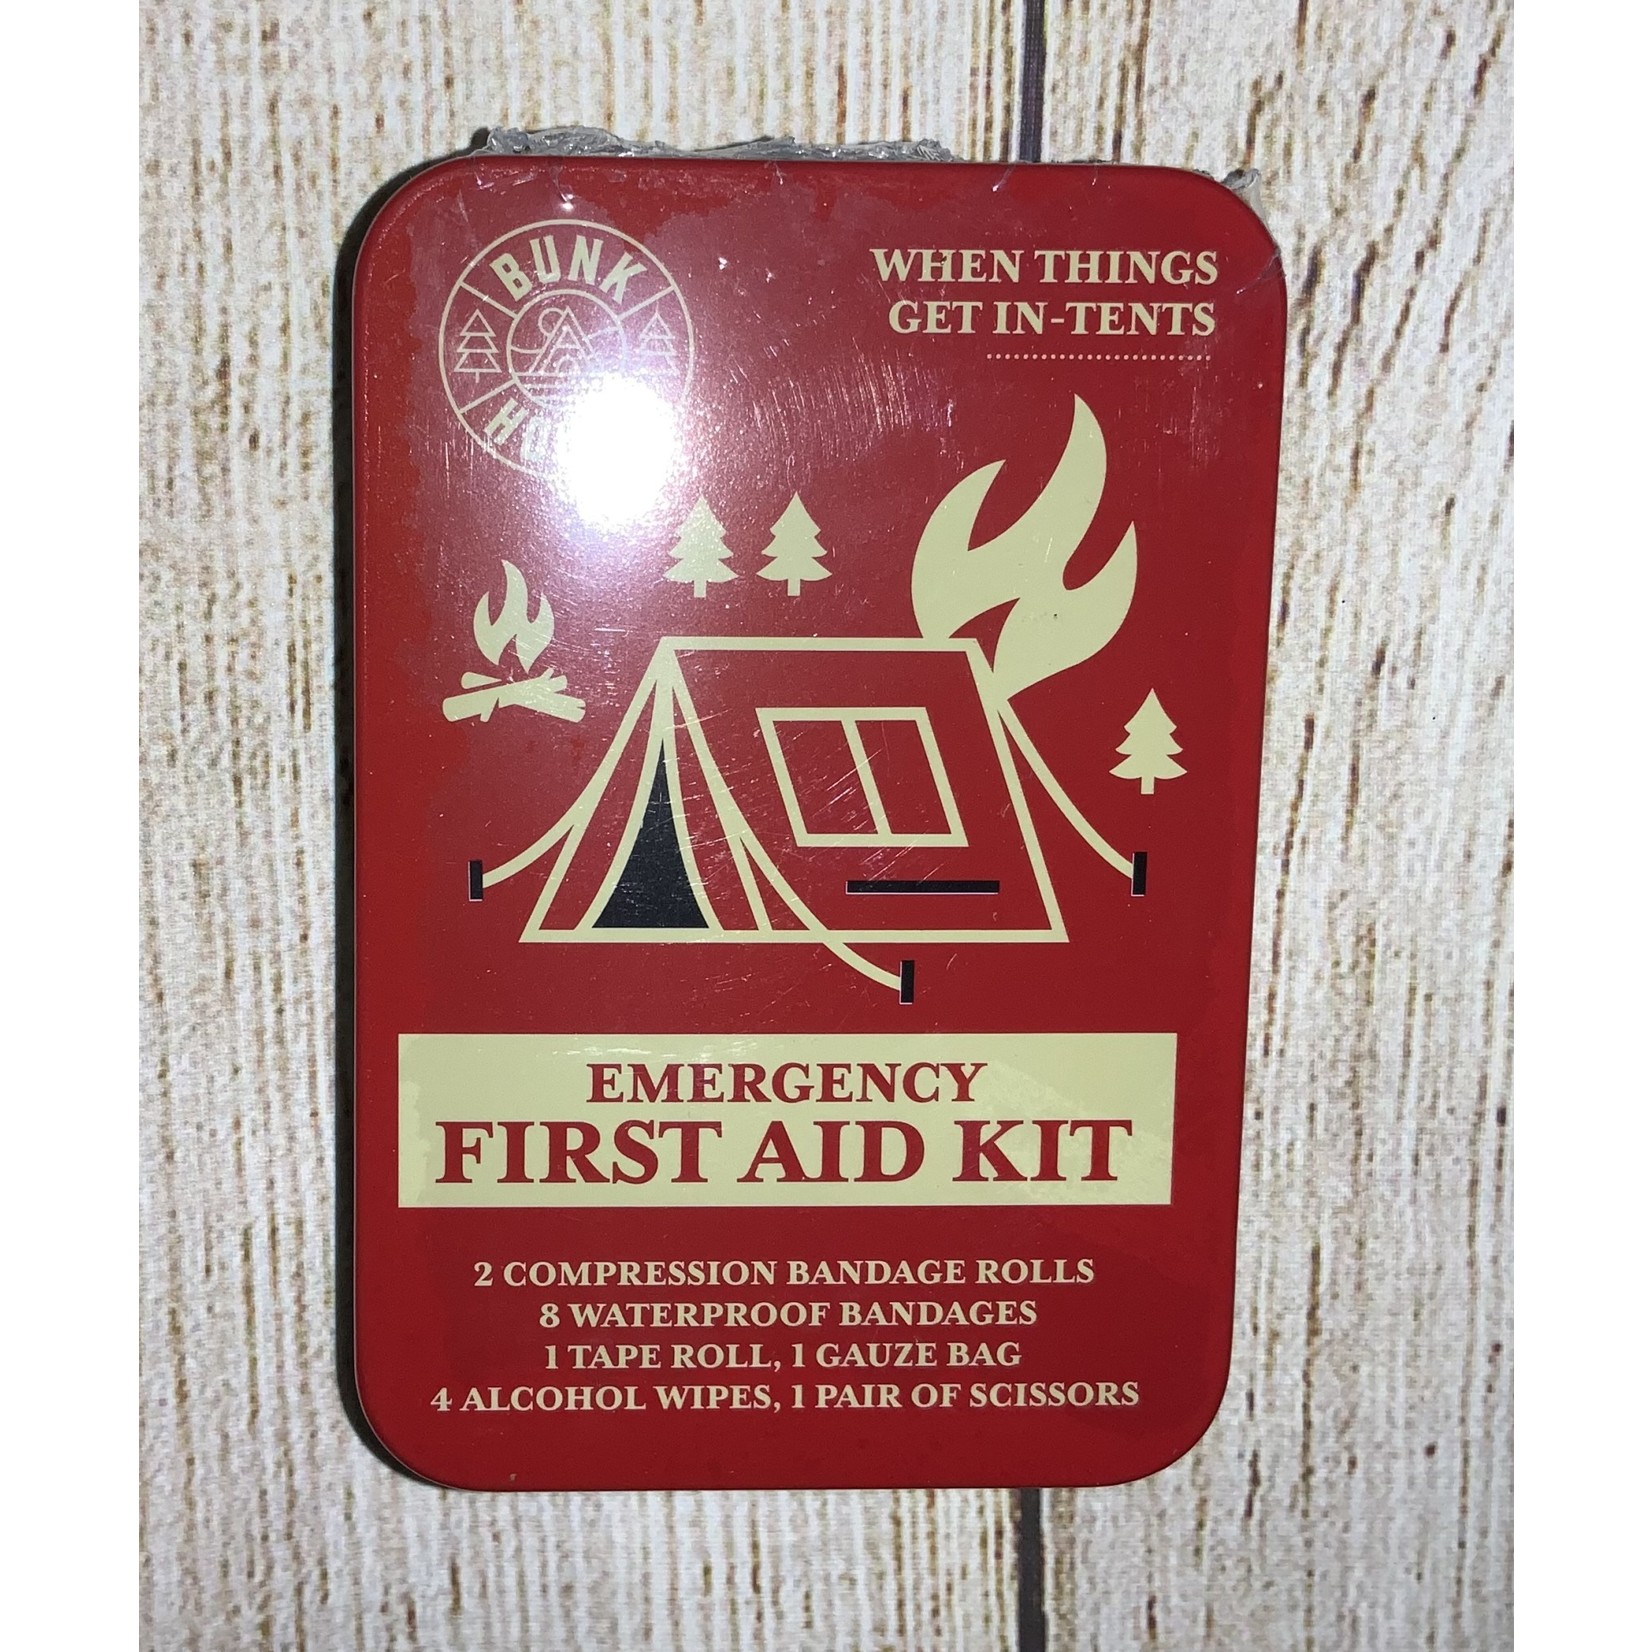 Bunk House Bunk House Emergency First Aid Kit Red/Tent